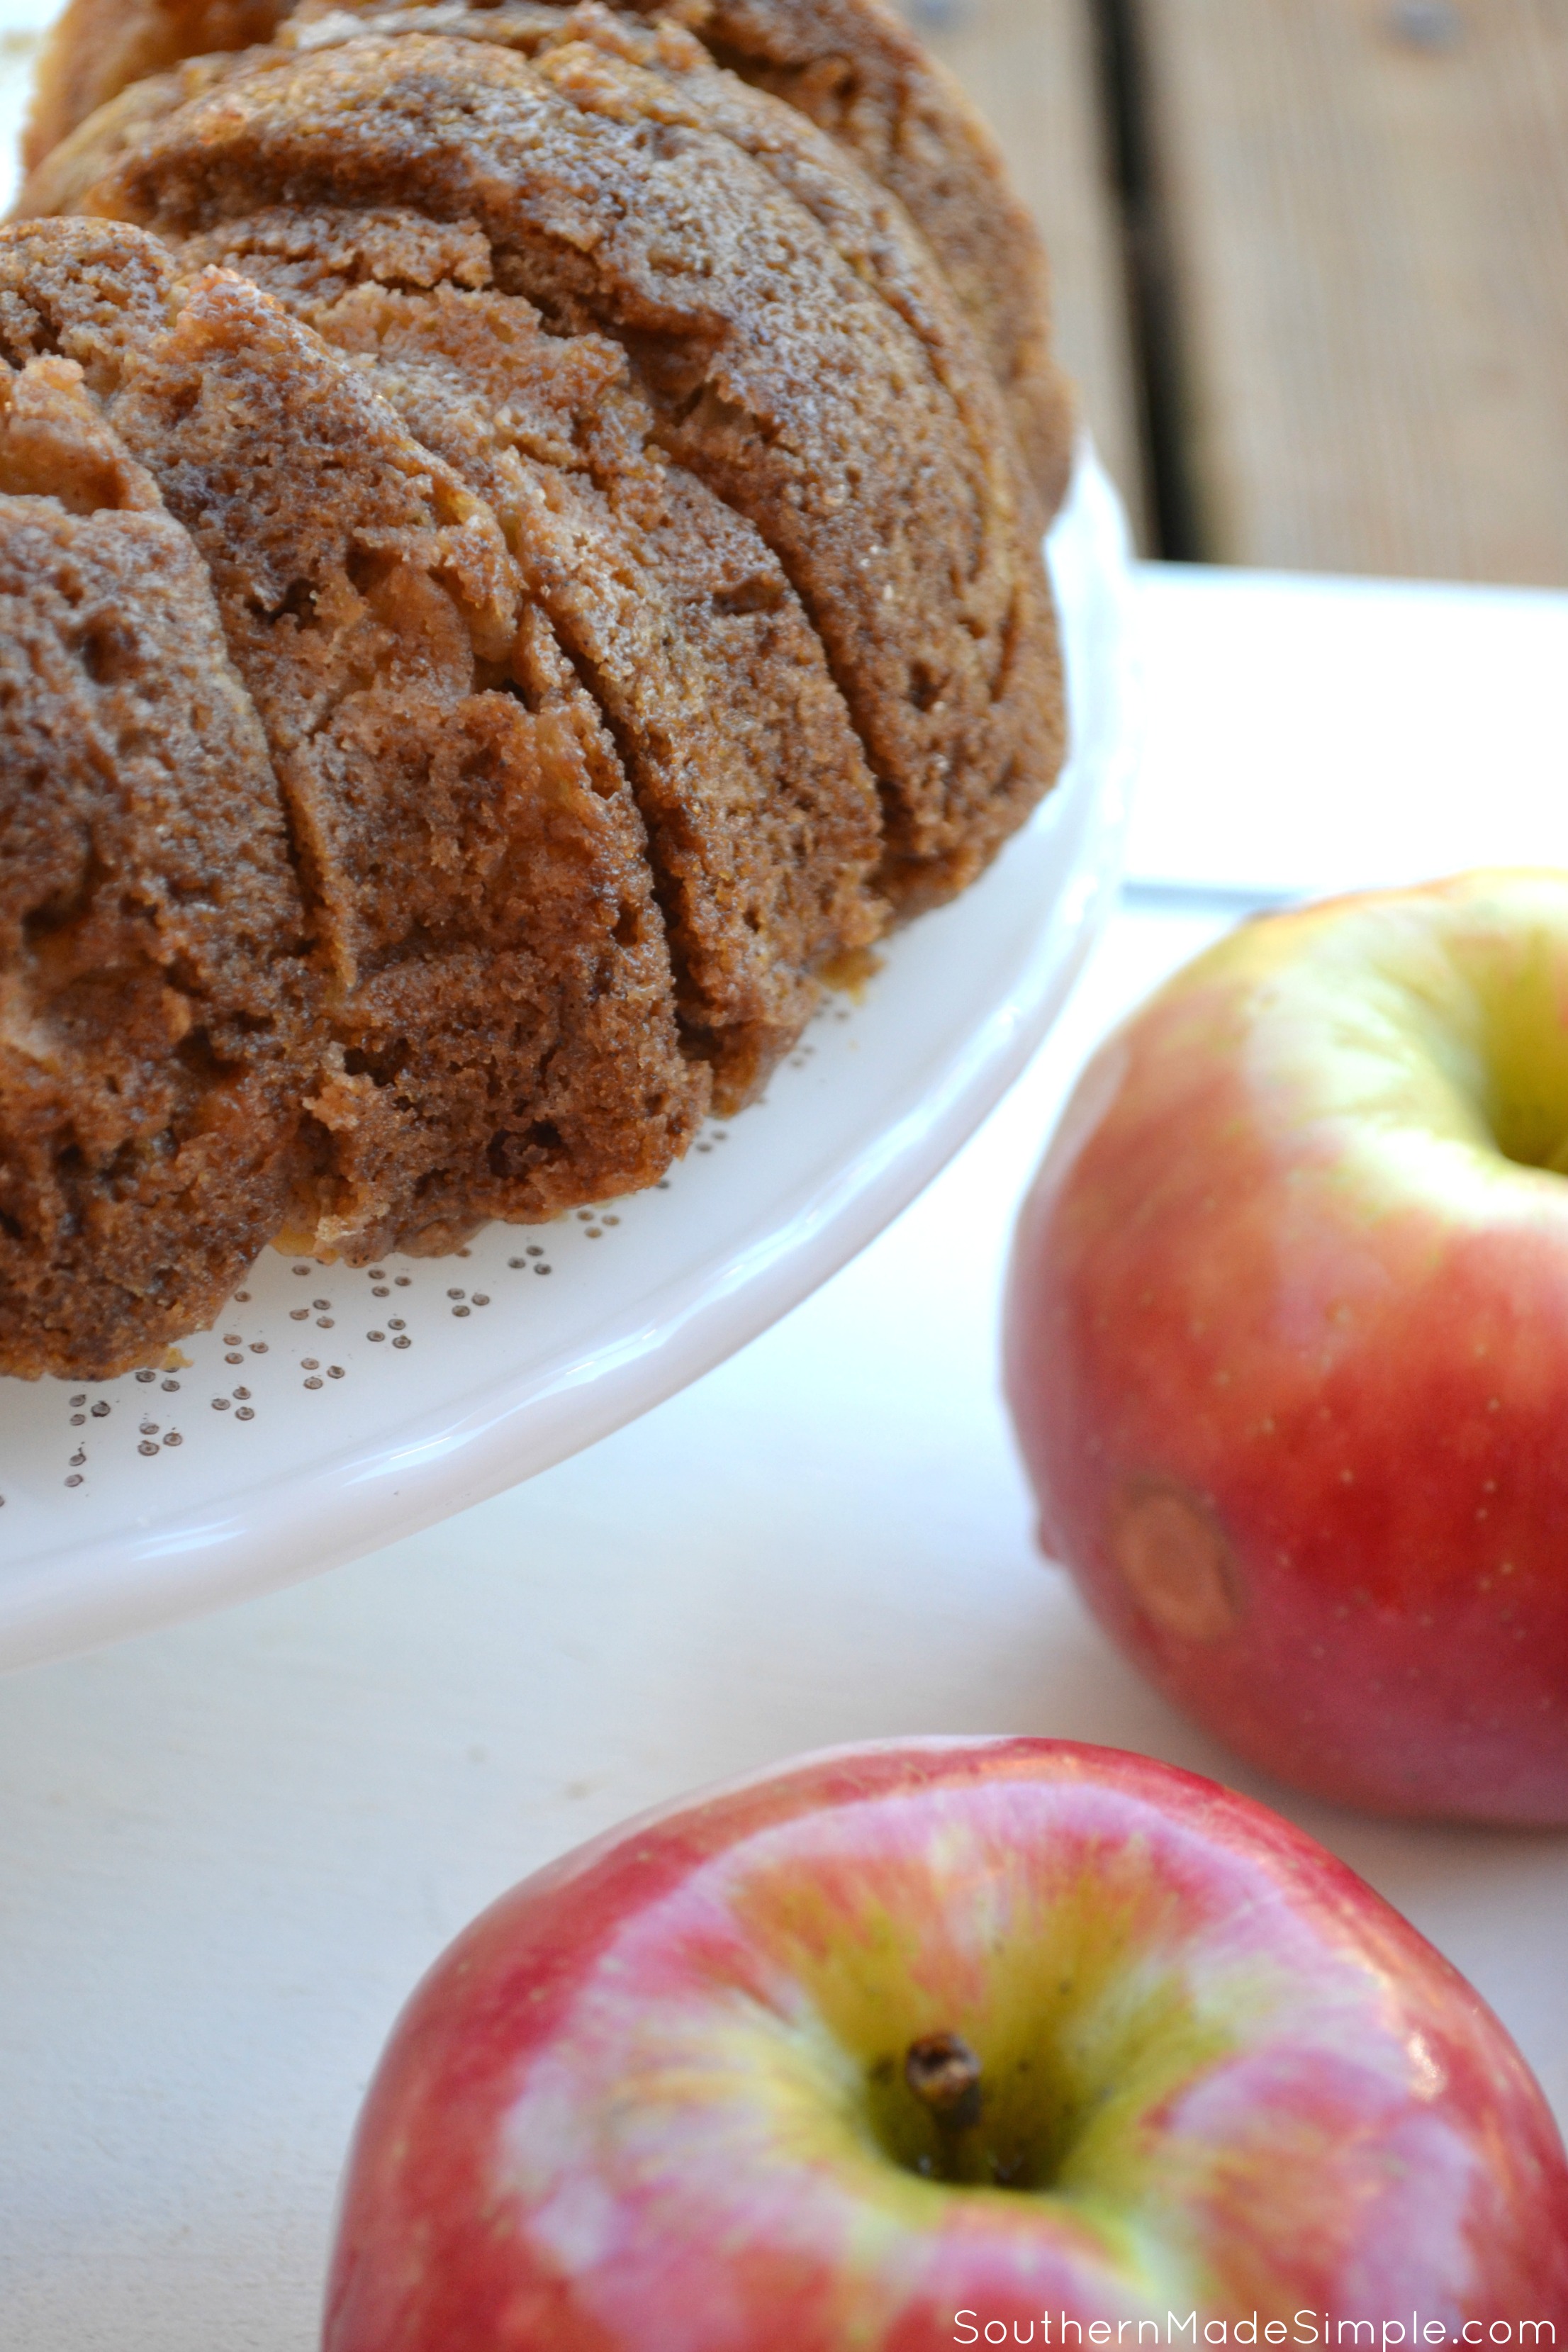 The easy fresh apple cake is incredibly simple, and perfectly moist! It's a great treat to make year round, but it's especially delicious during the Fall months. It's also a great way to use up any extra apples you have on hand!